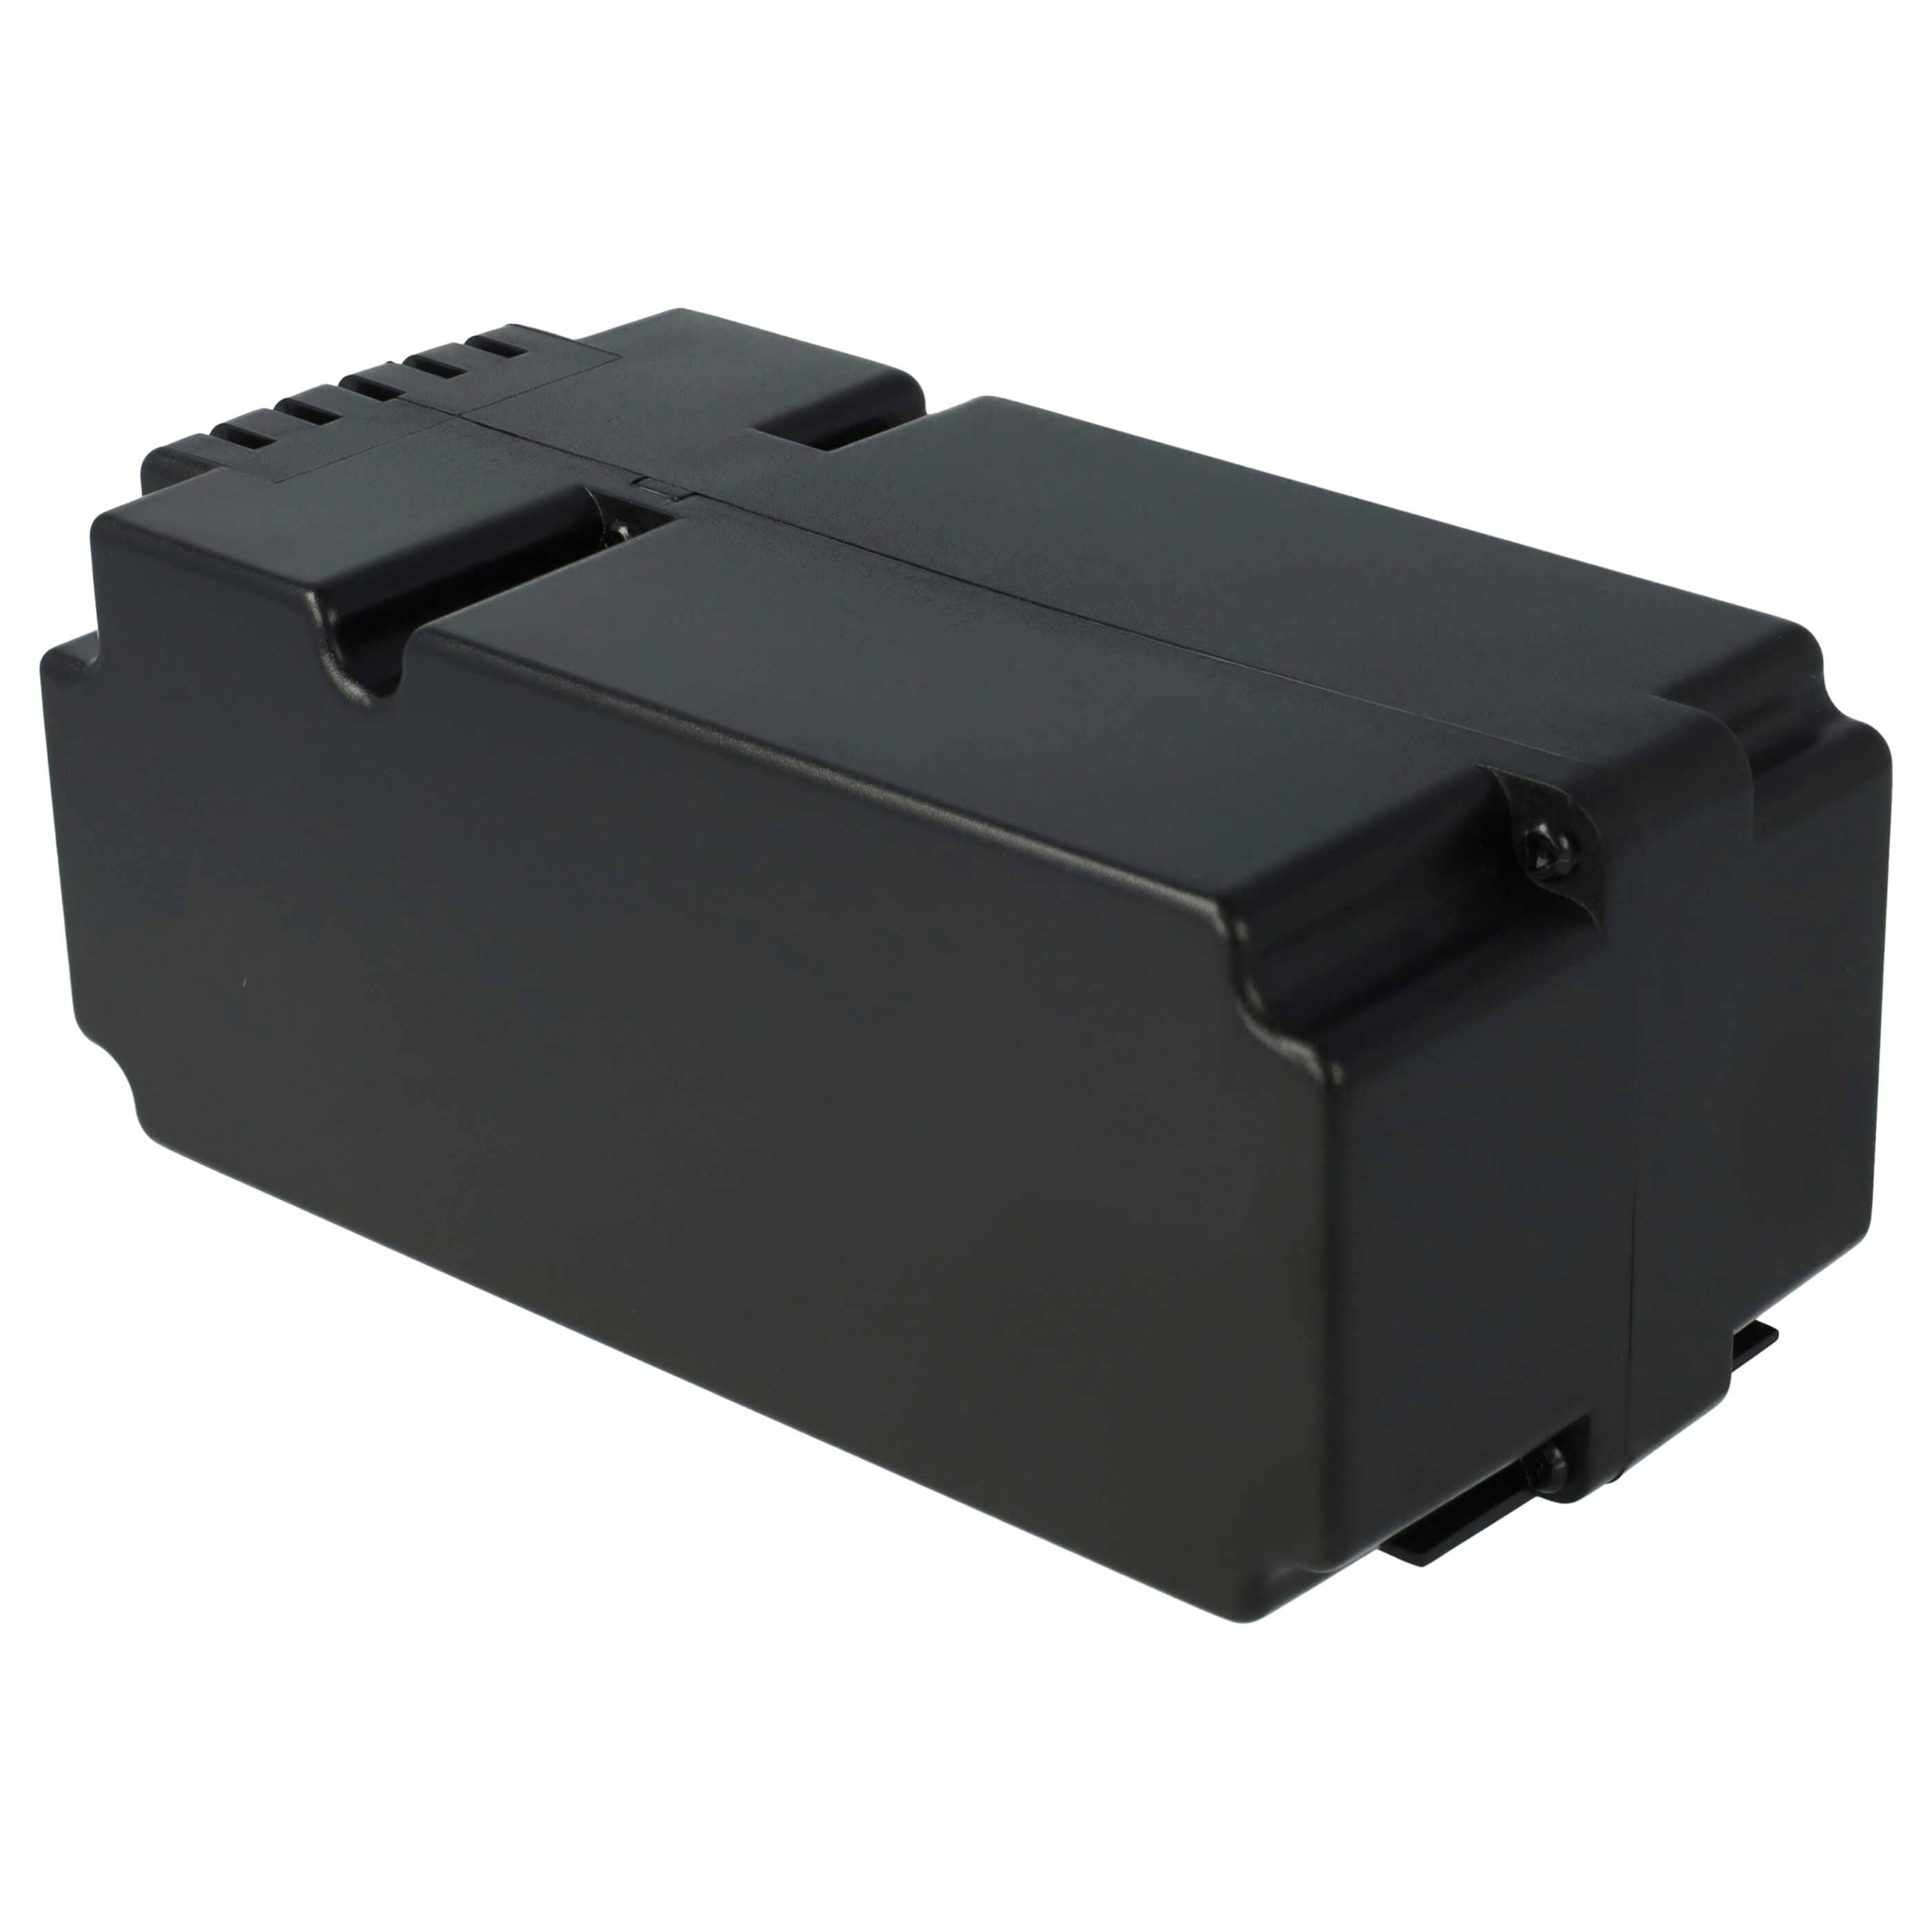 Lawnmower Battery Replacement for Yard Force 862601, 862615, 0862622, 0862622001 - 3000mAh 25.2V Li-Ion